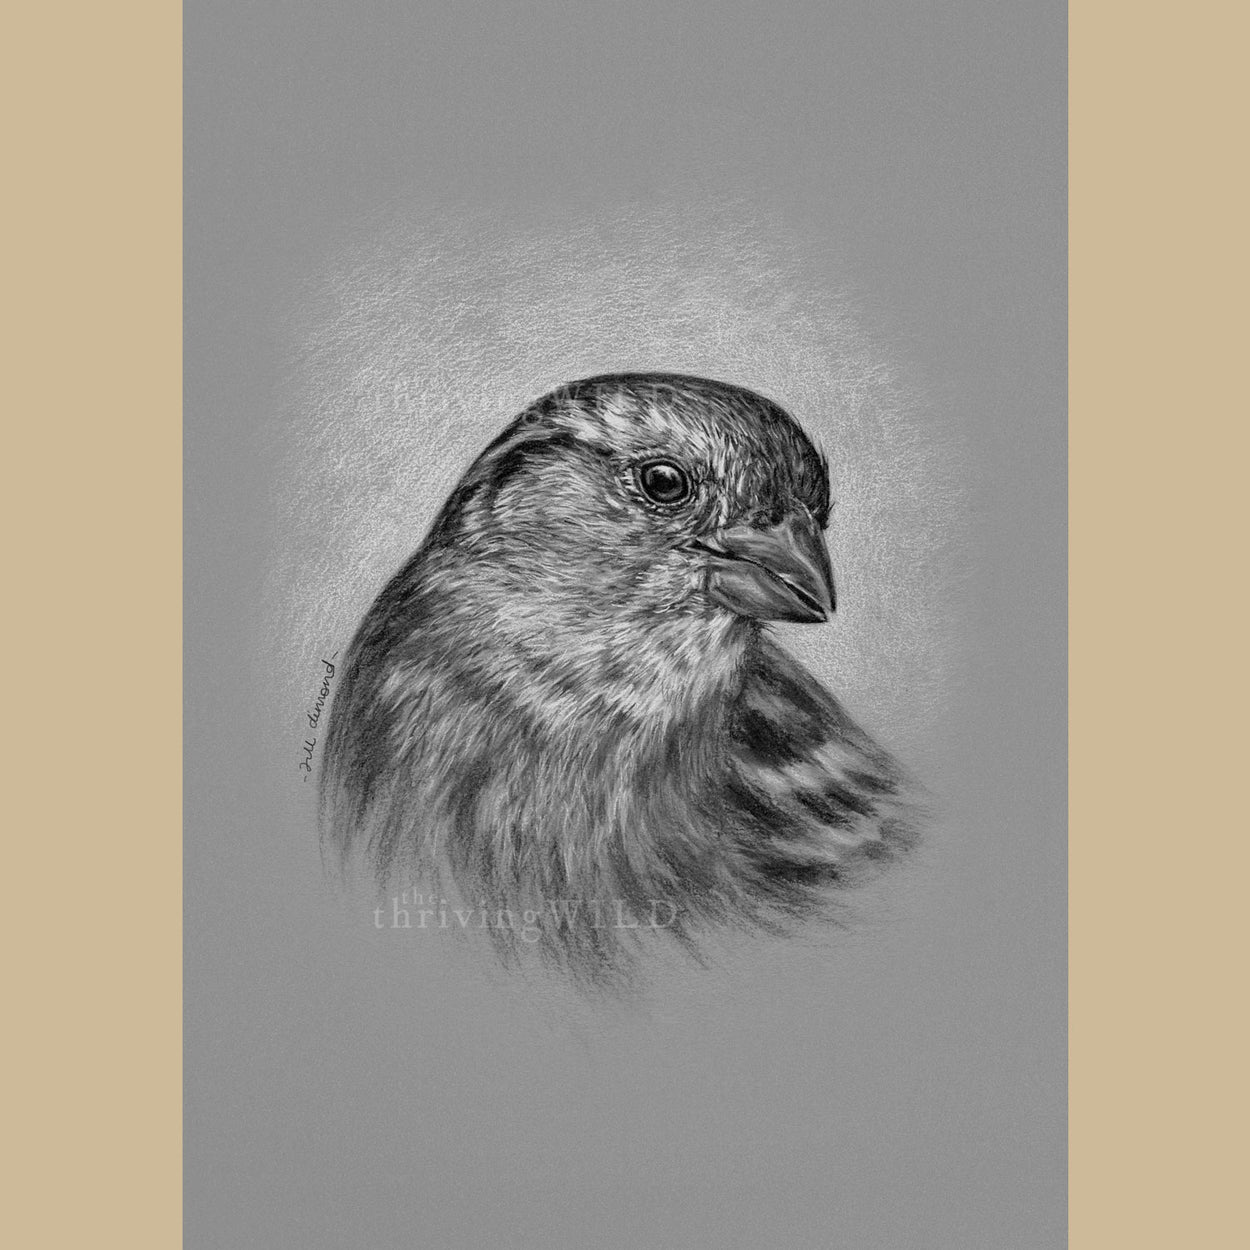 Female House Sparrow Charcoal Drawing - The Thriving Wild - Jill Dimond